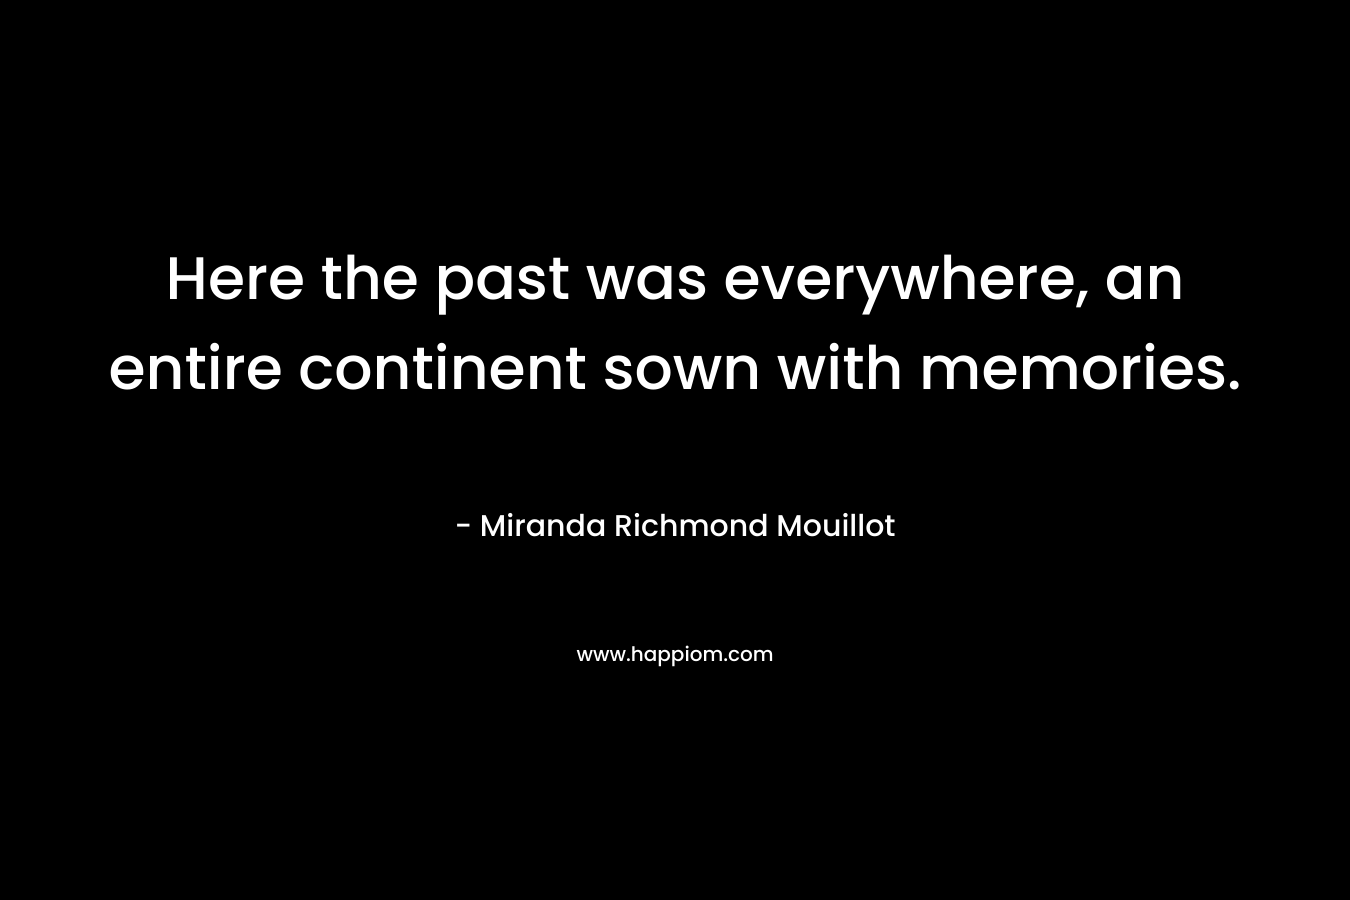 Here the past was everywhere, an entire continent sown with memories. – Miranda Richmond Mouillot